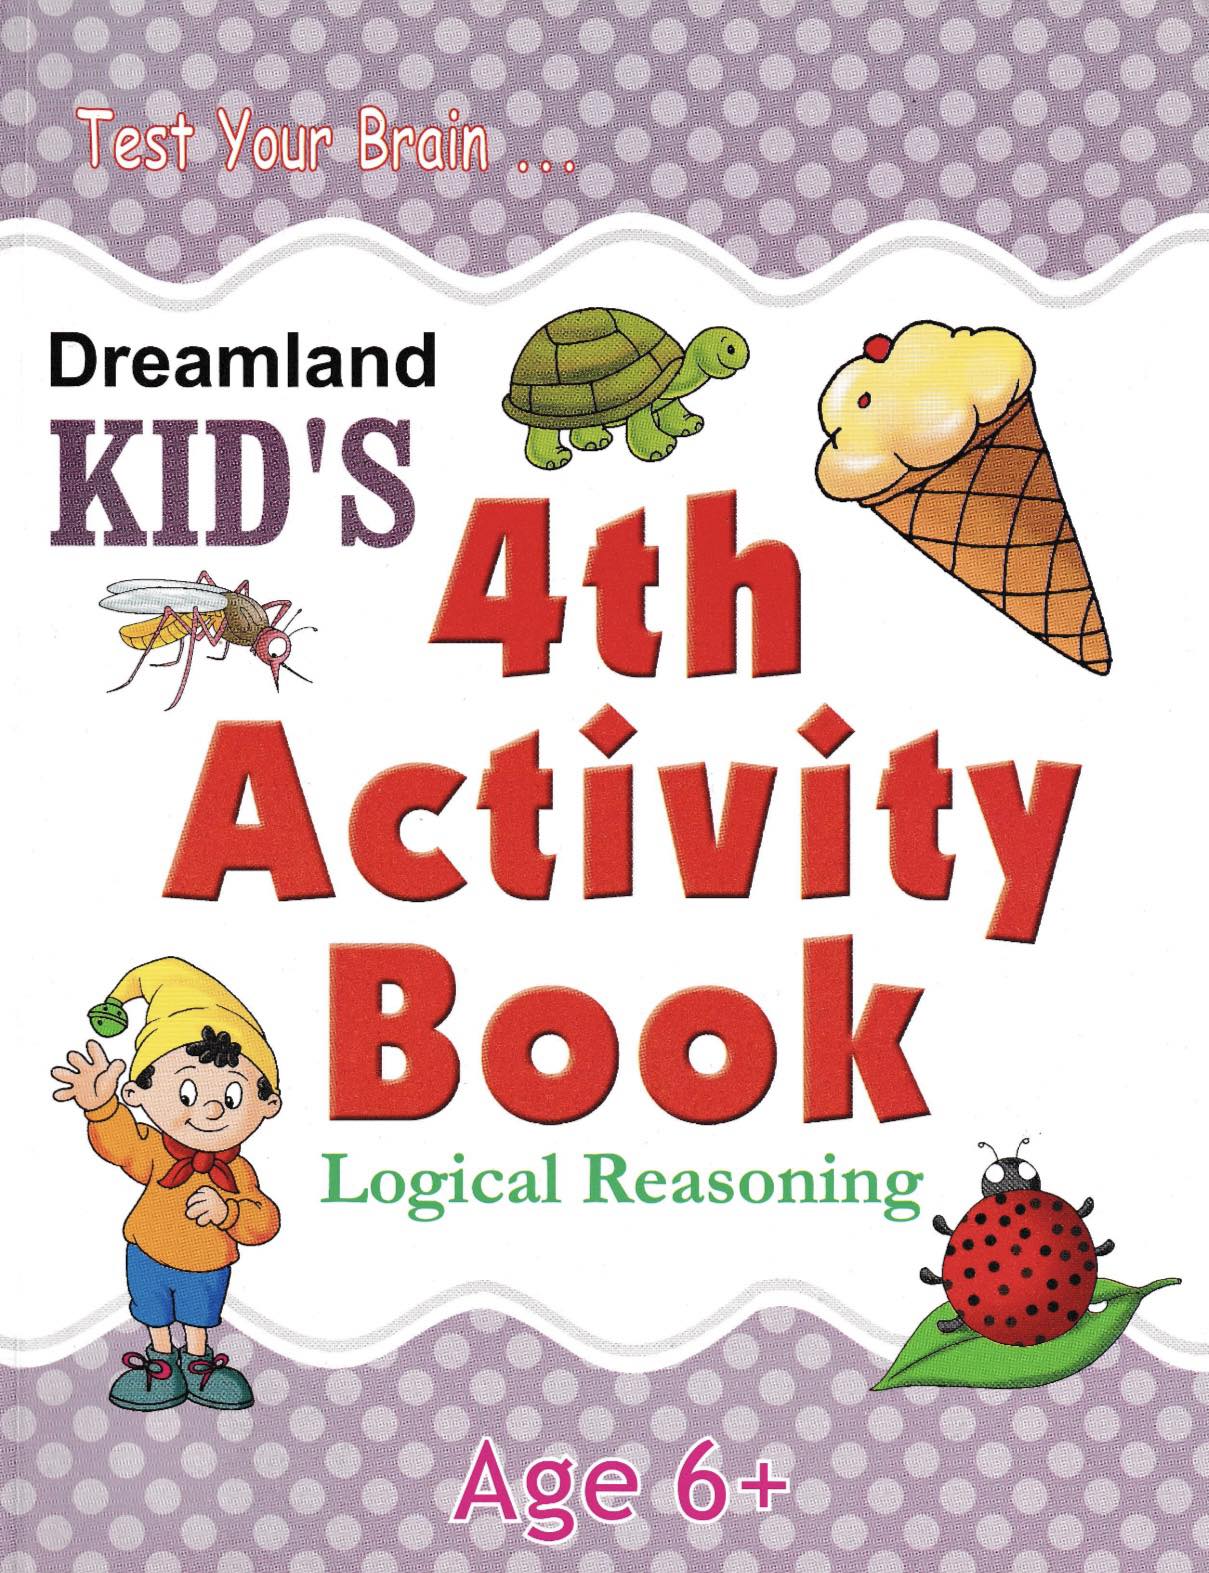 Dreamland Kid's 4th Activity Book for Age 6+